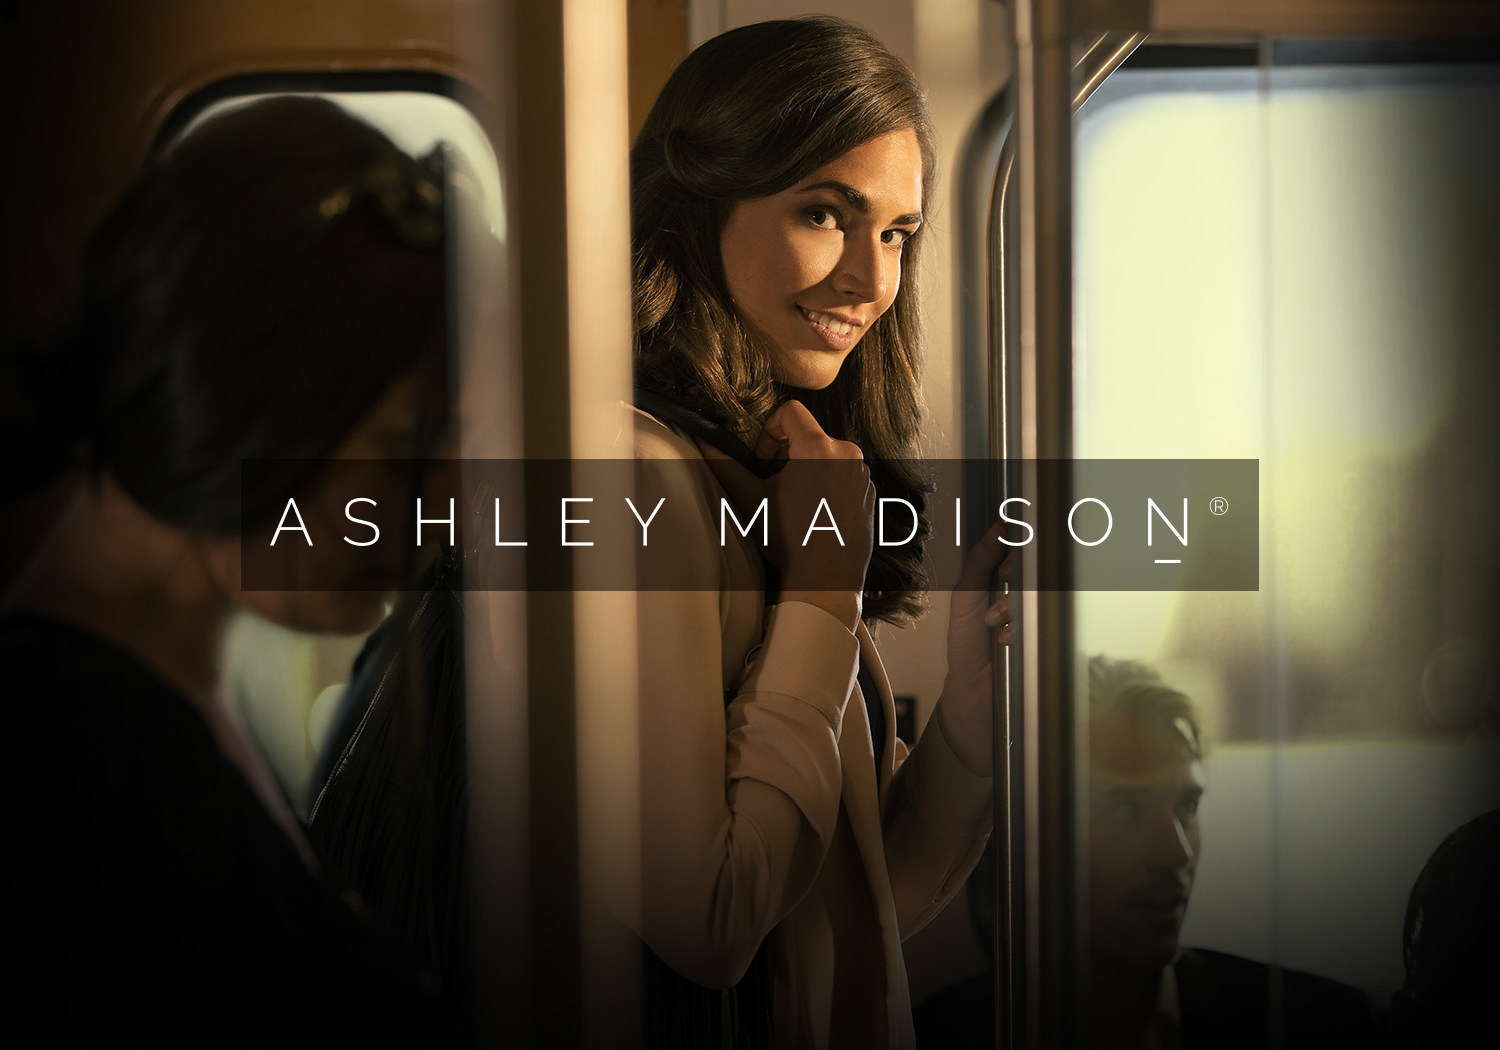 Ashley Madison gives infidelity a new look